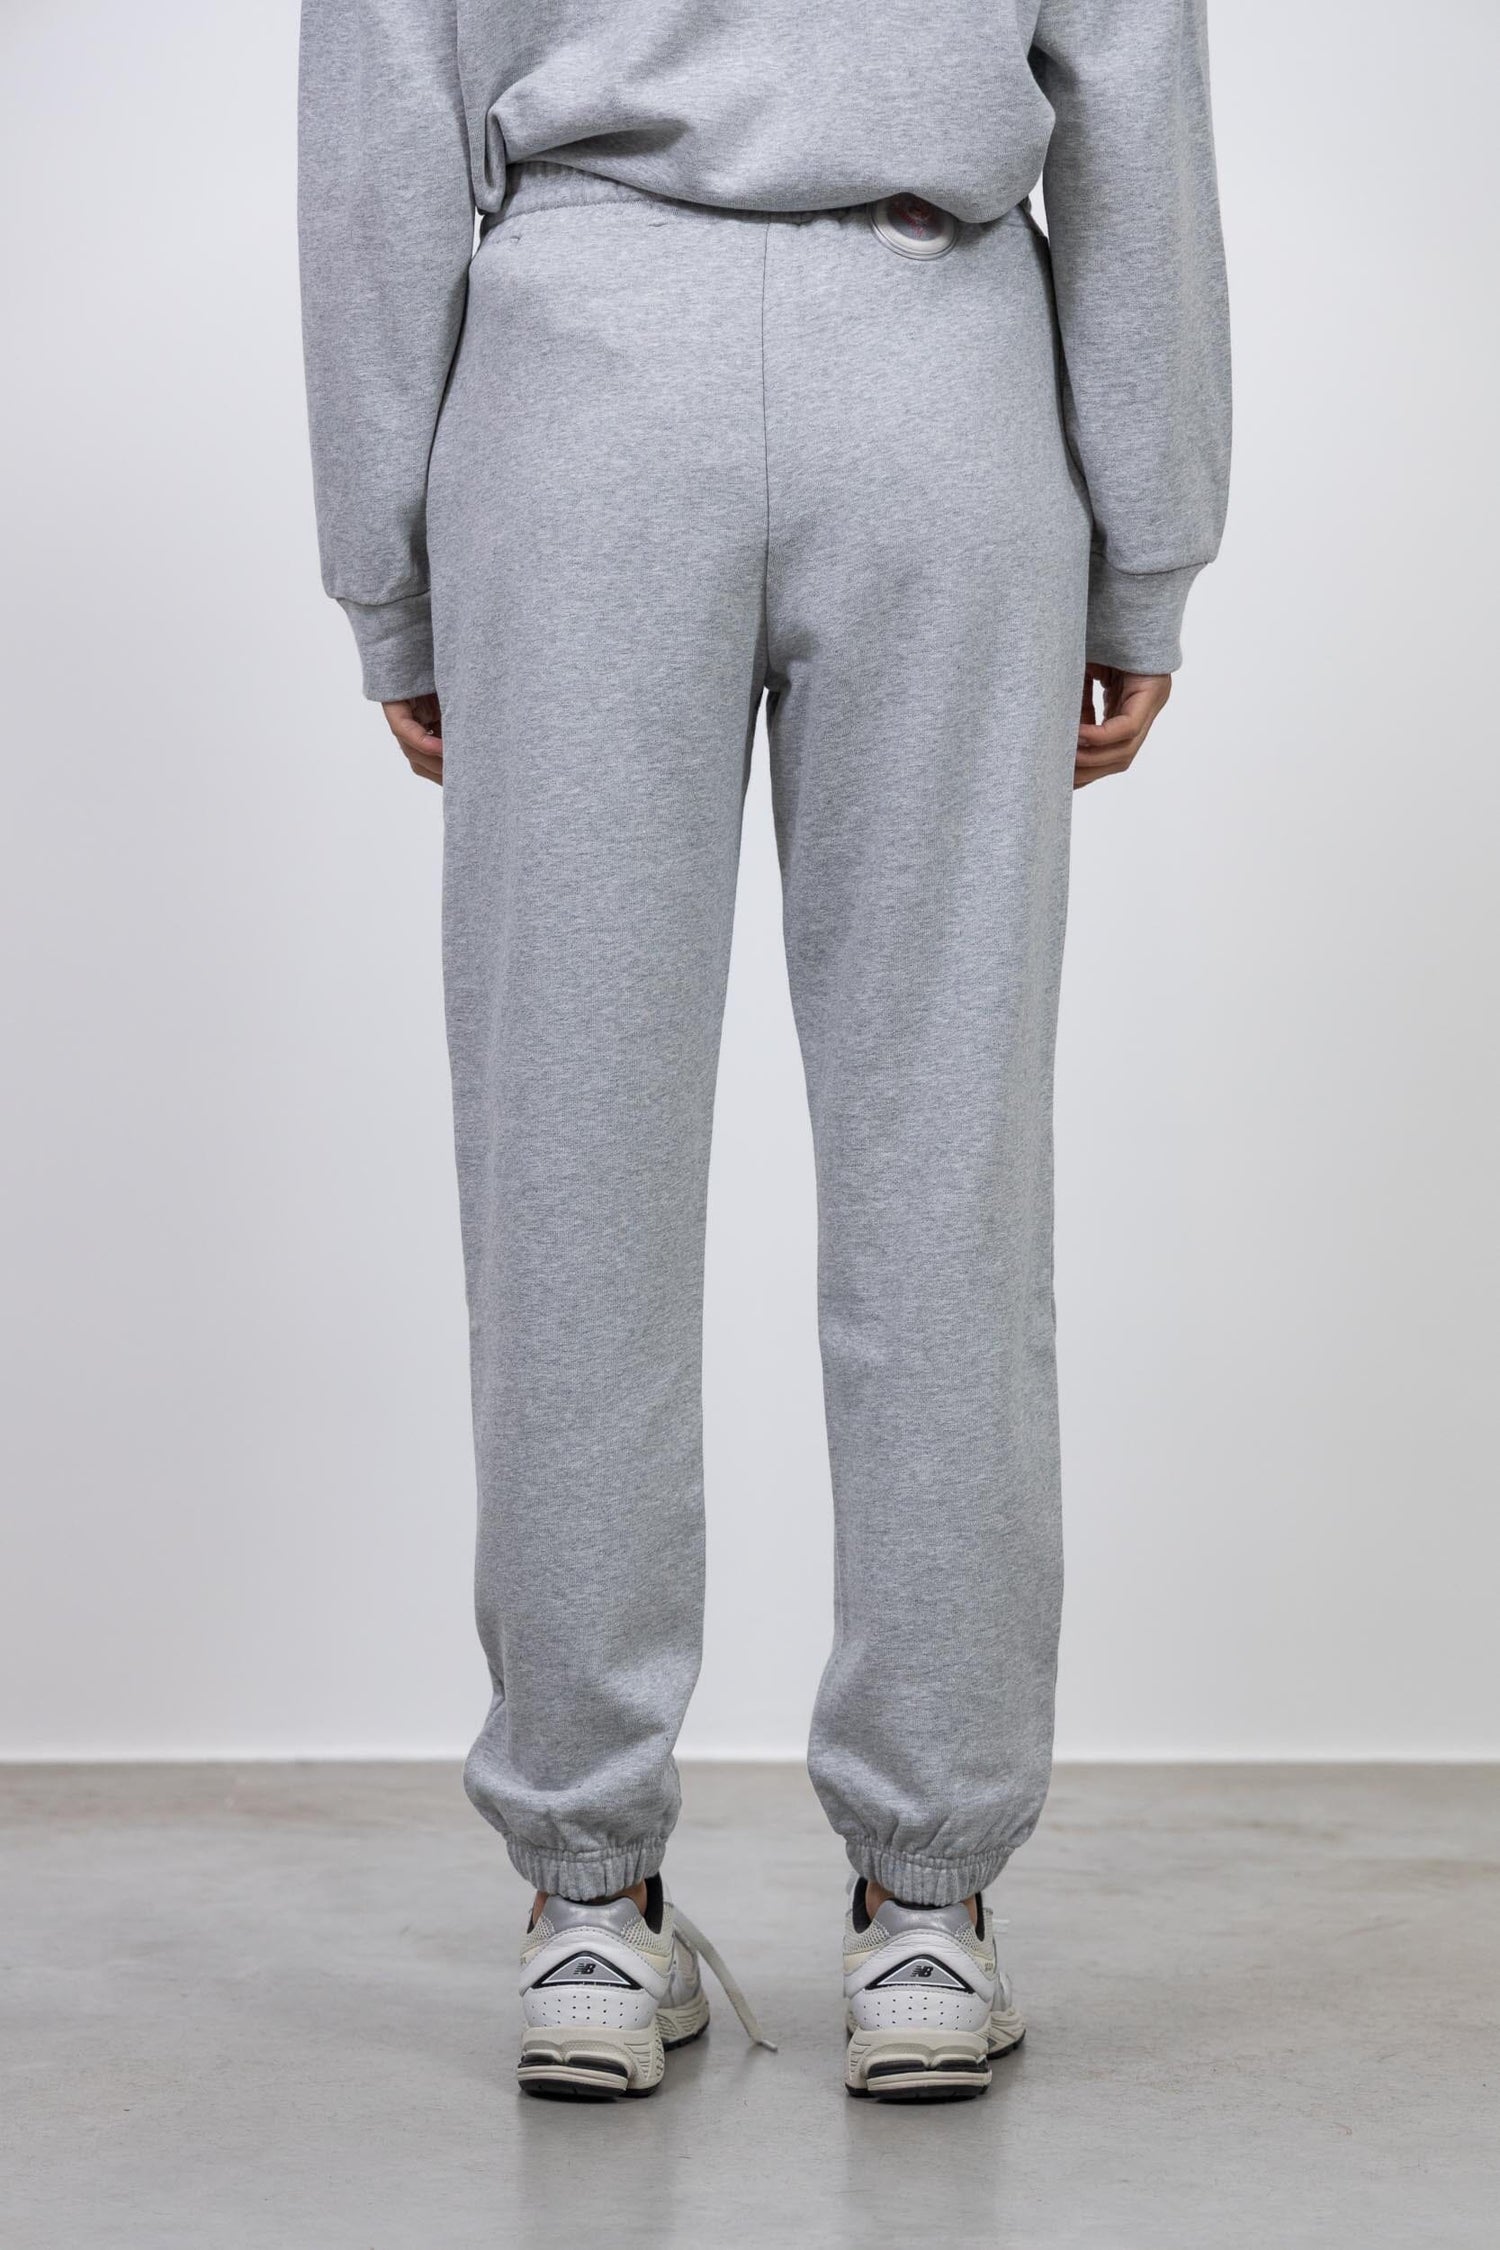 ZOE THE COTTON SWEATPANTS sweatpants ONE AND OTHER 